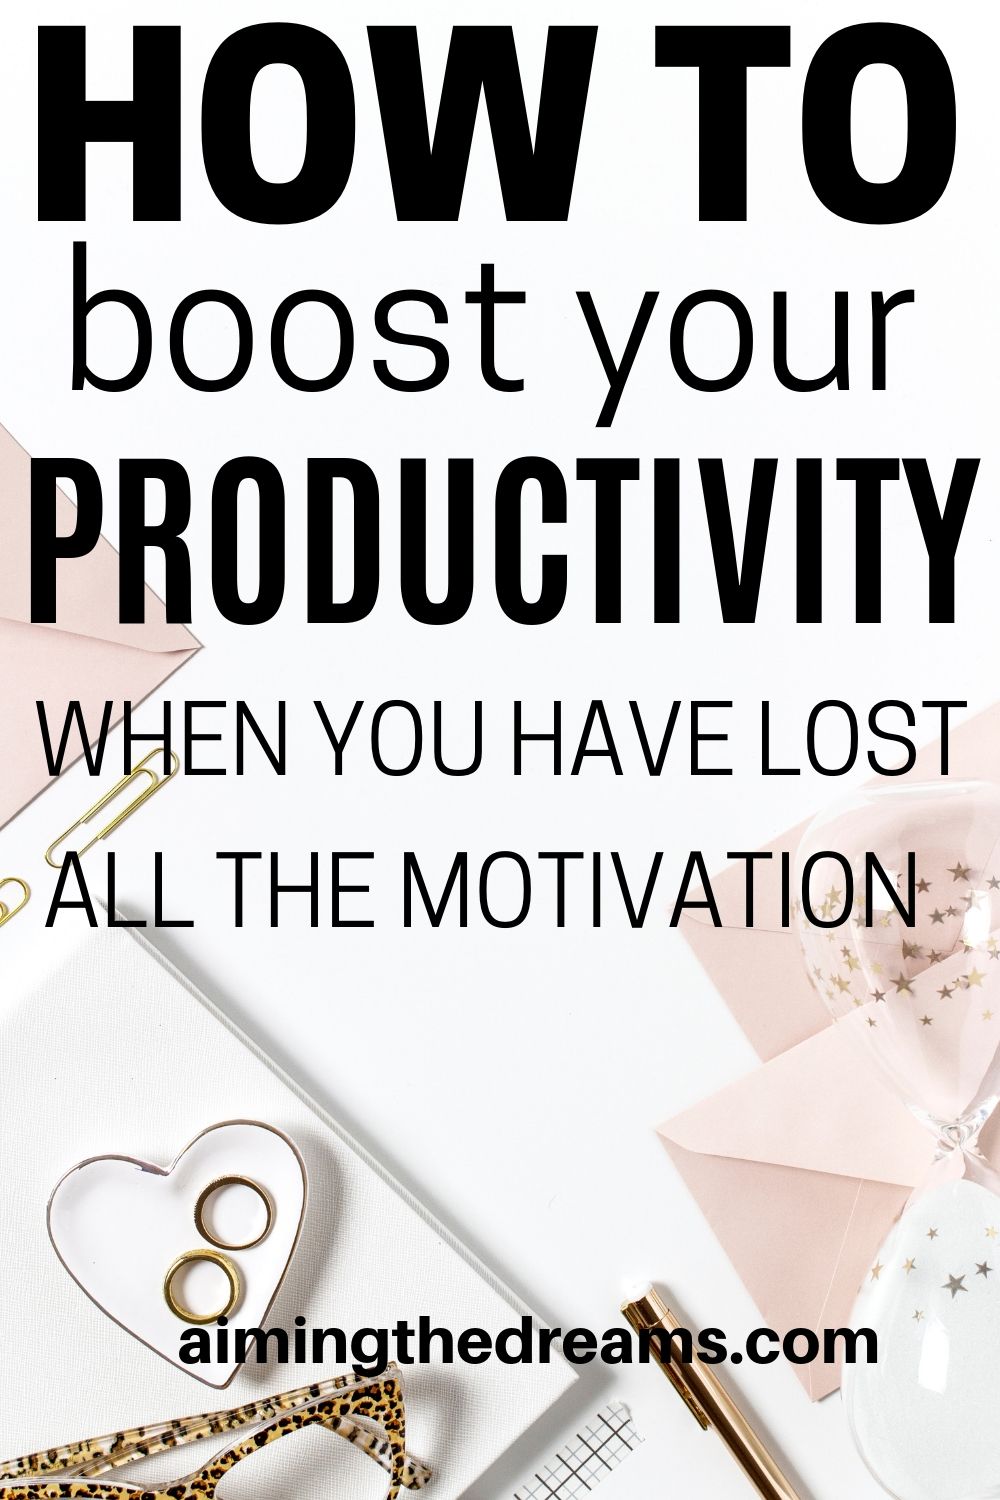 How to stay productive when you are not motivated to do anything